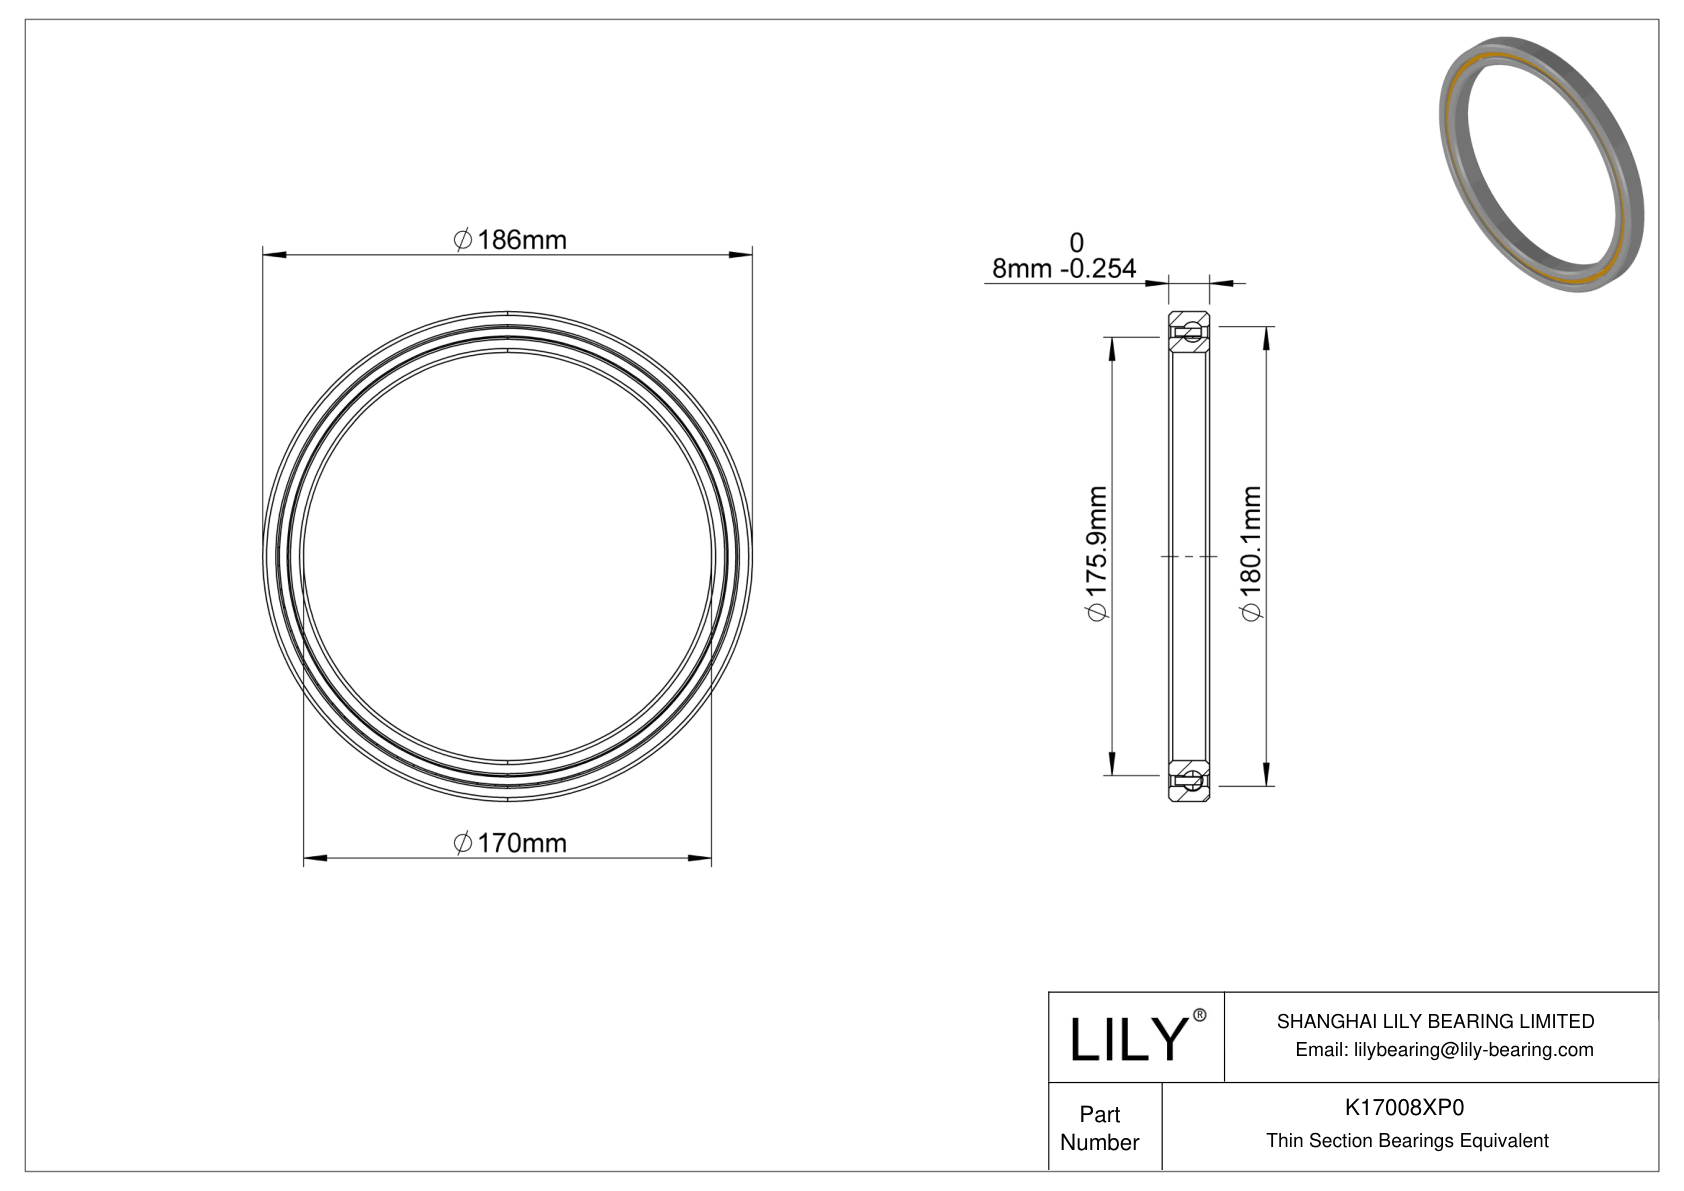 K17008XP0 Constant Section (CS) Bearings cad drawing